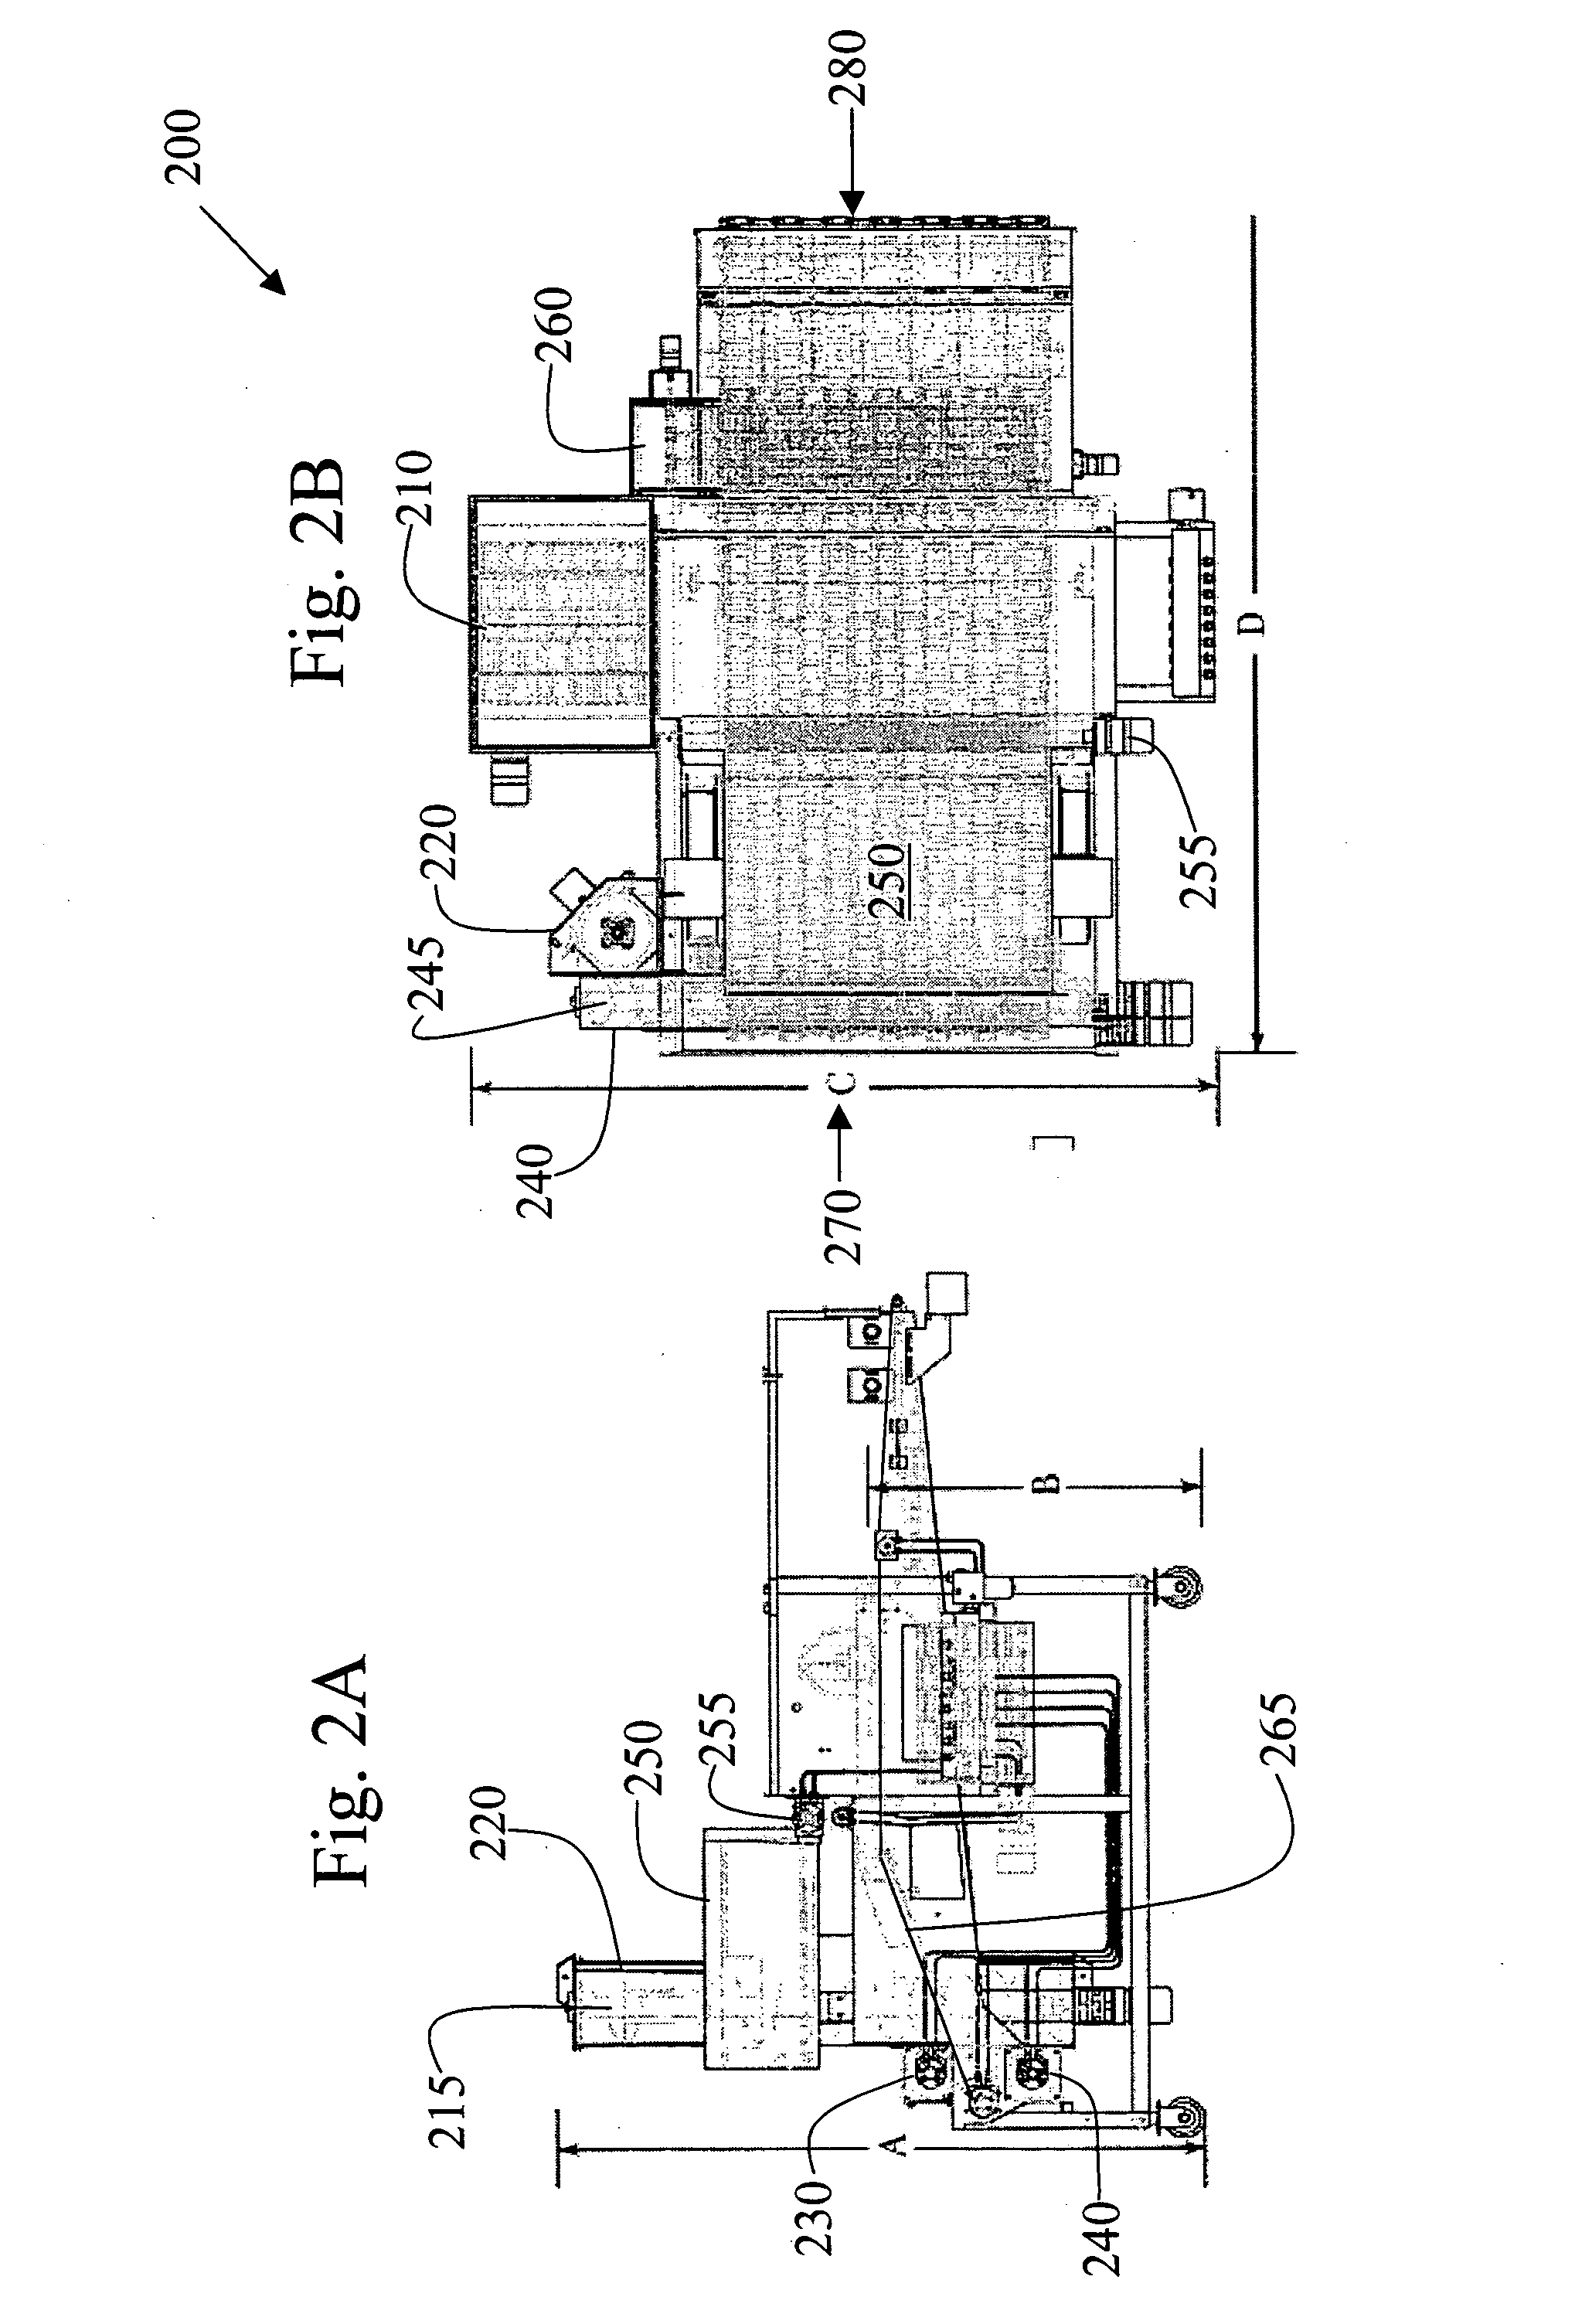 Breading machine and methods of operation